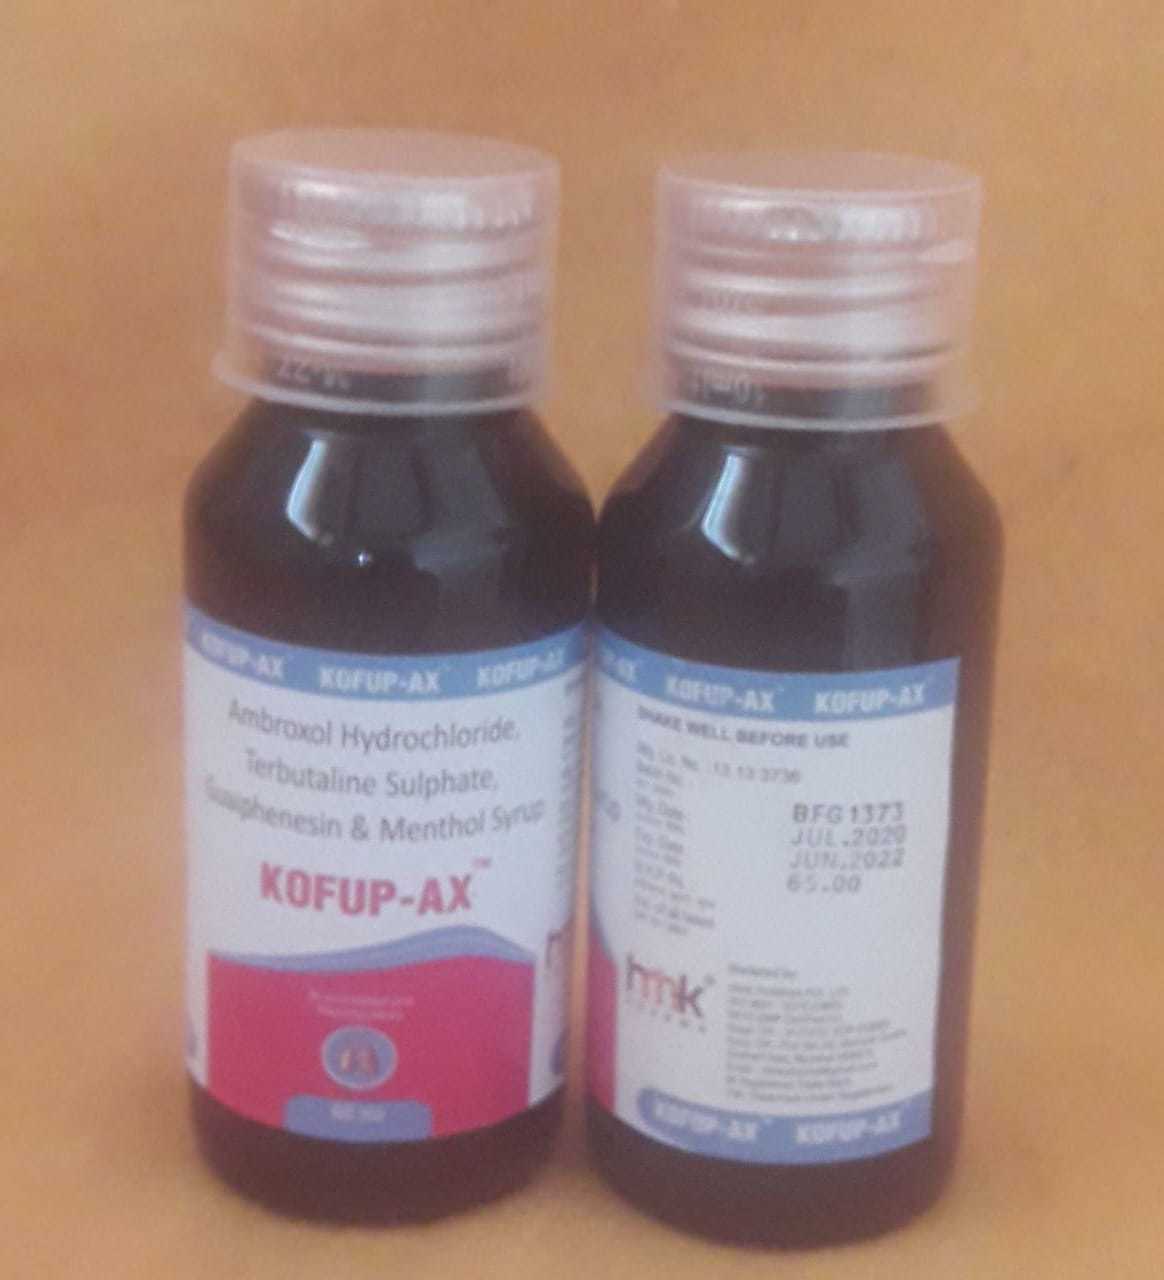 60ml Ambroxol HCL Terbutaline Sulphate Guaiphenesin Menthol Syrups